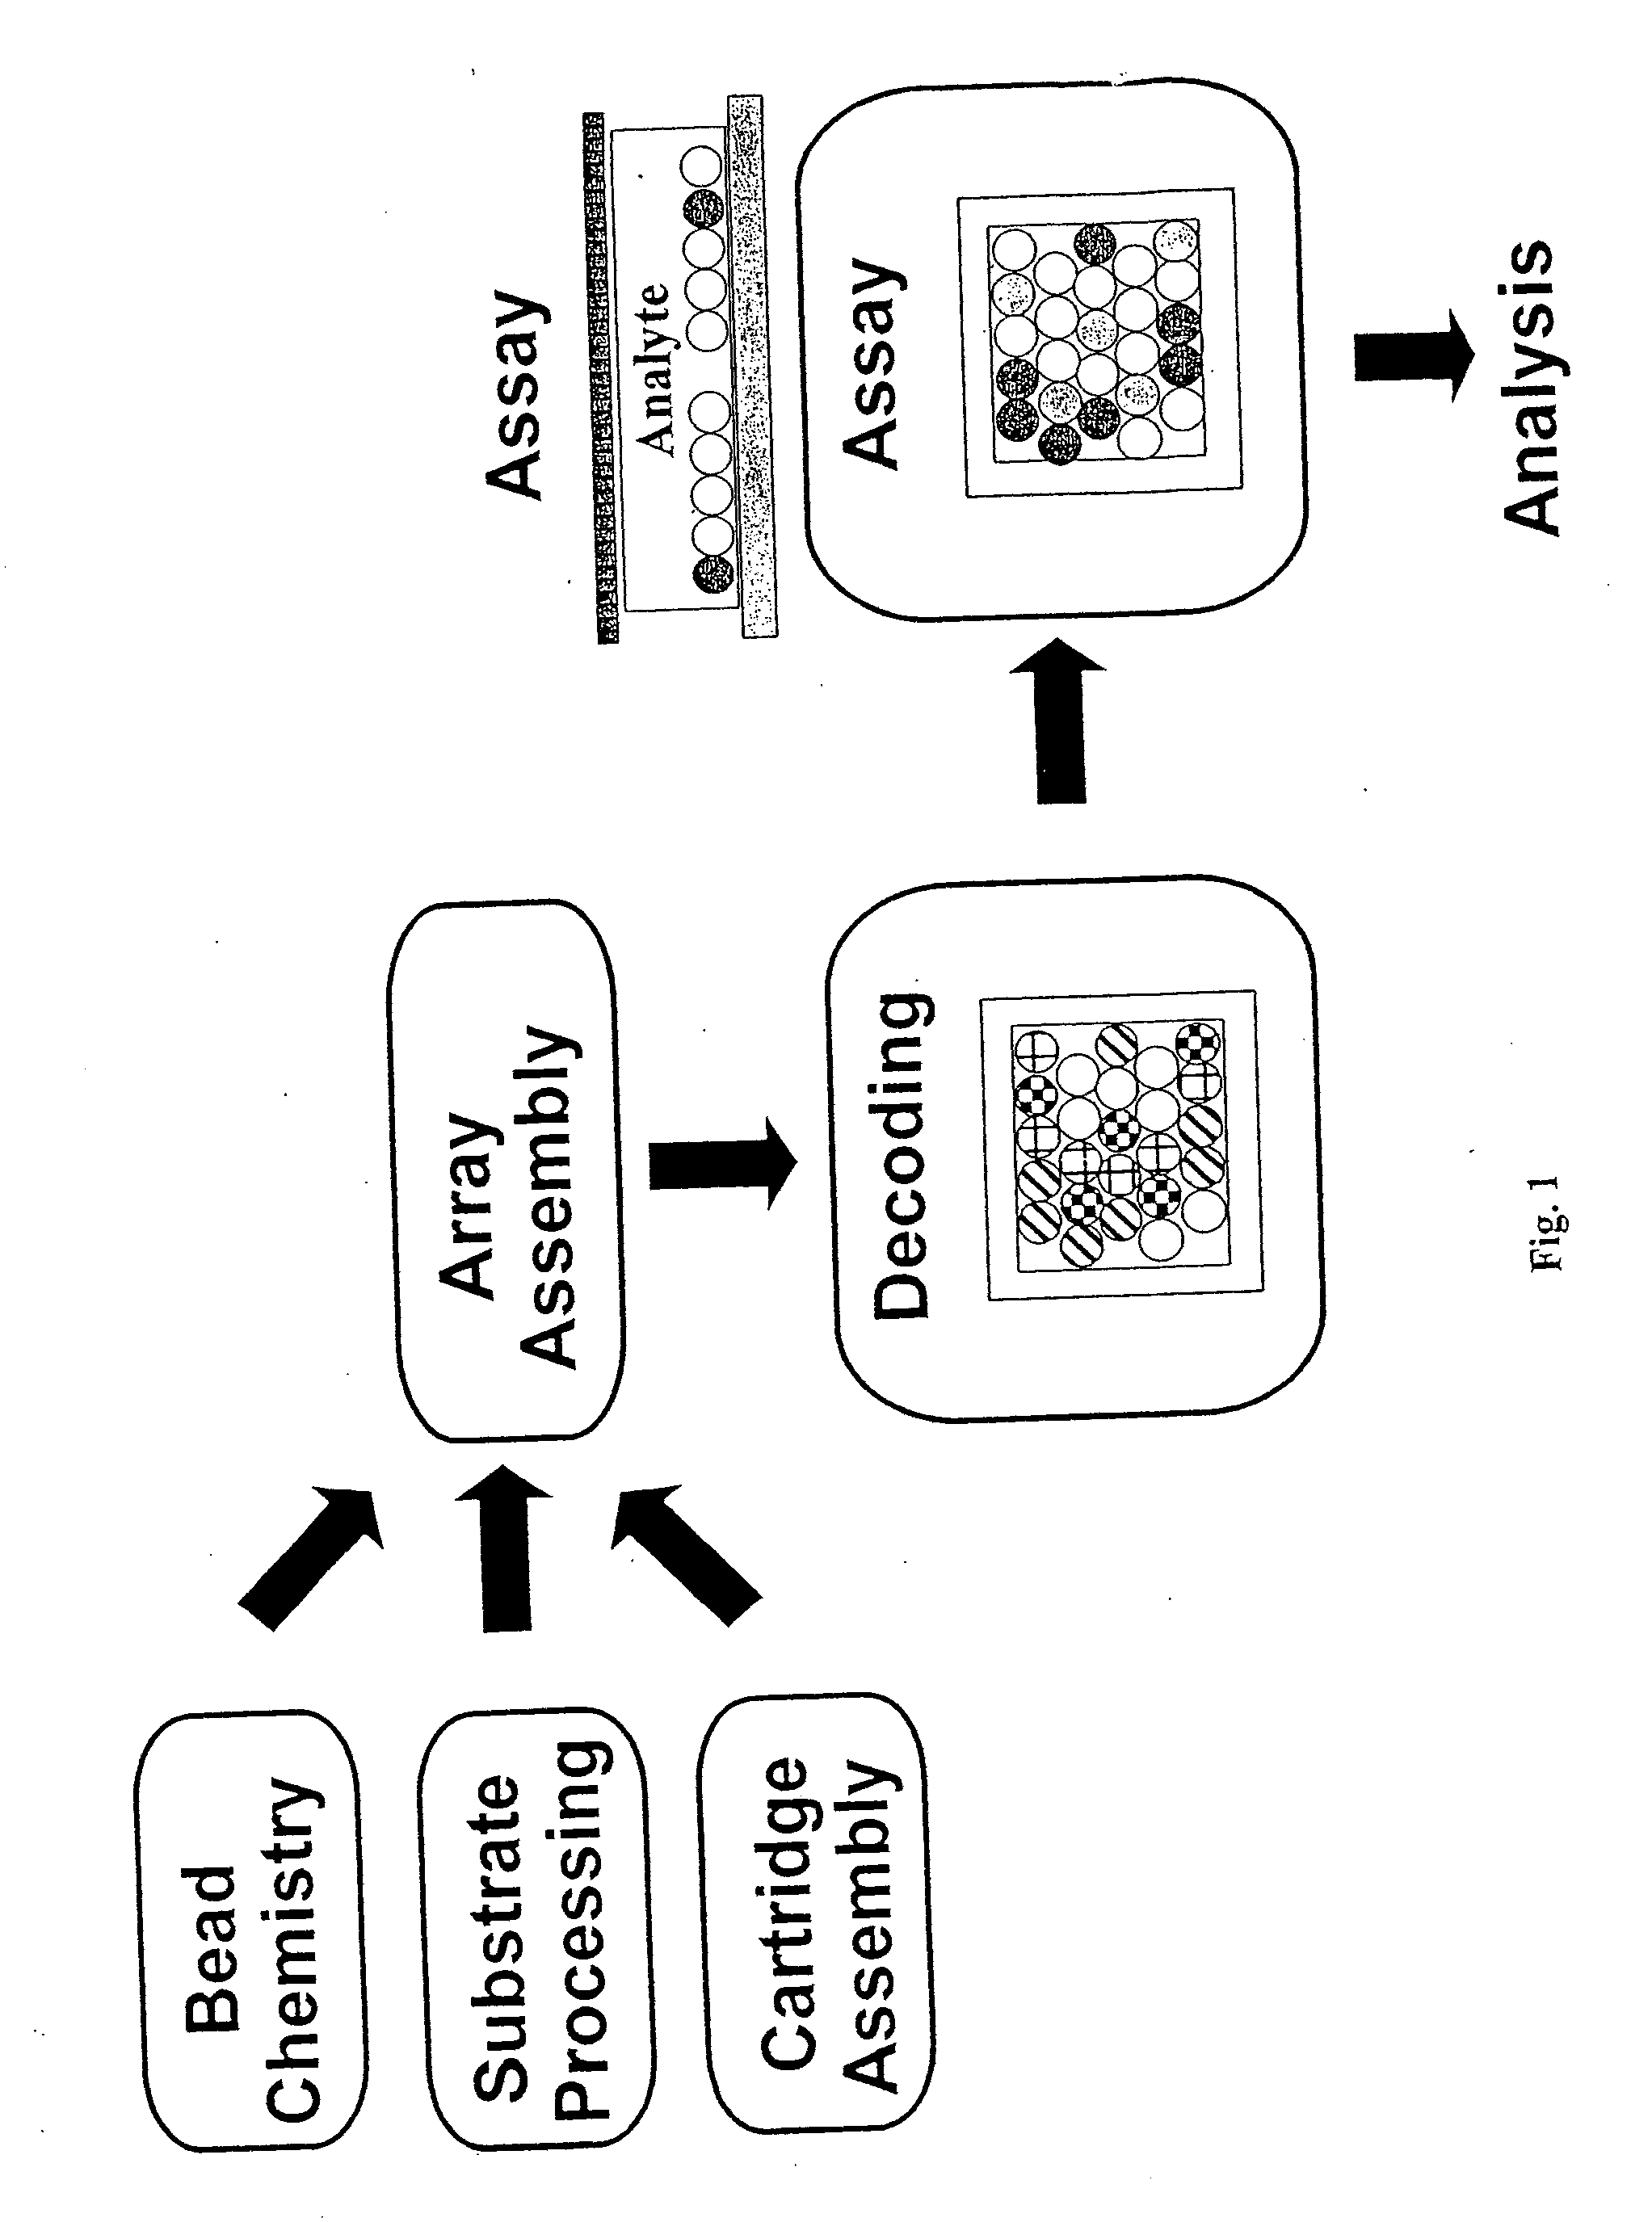 Multianalyte molecular analysis using application-specific random particle arrays